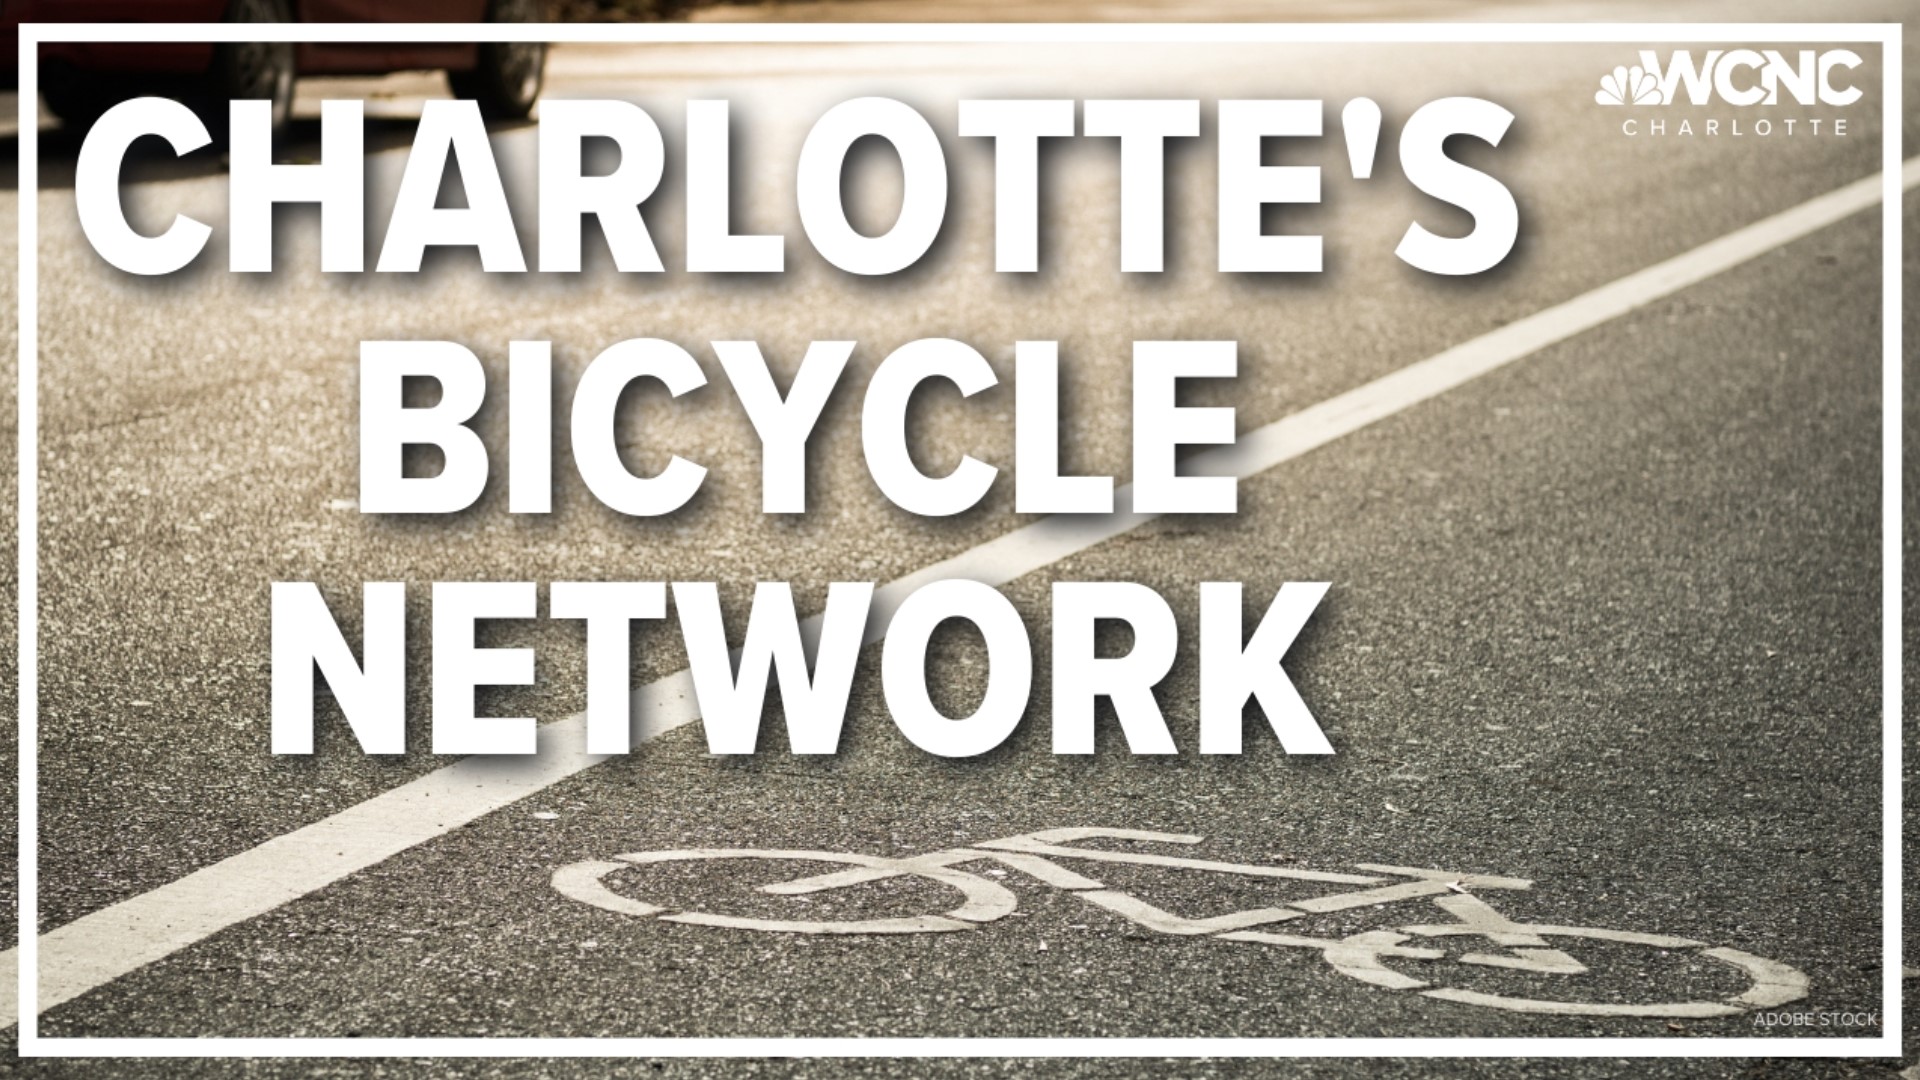 Charlotte city leaders are seeking solutions to grow the network and make cycling safer.